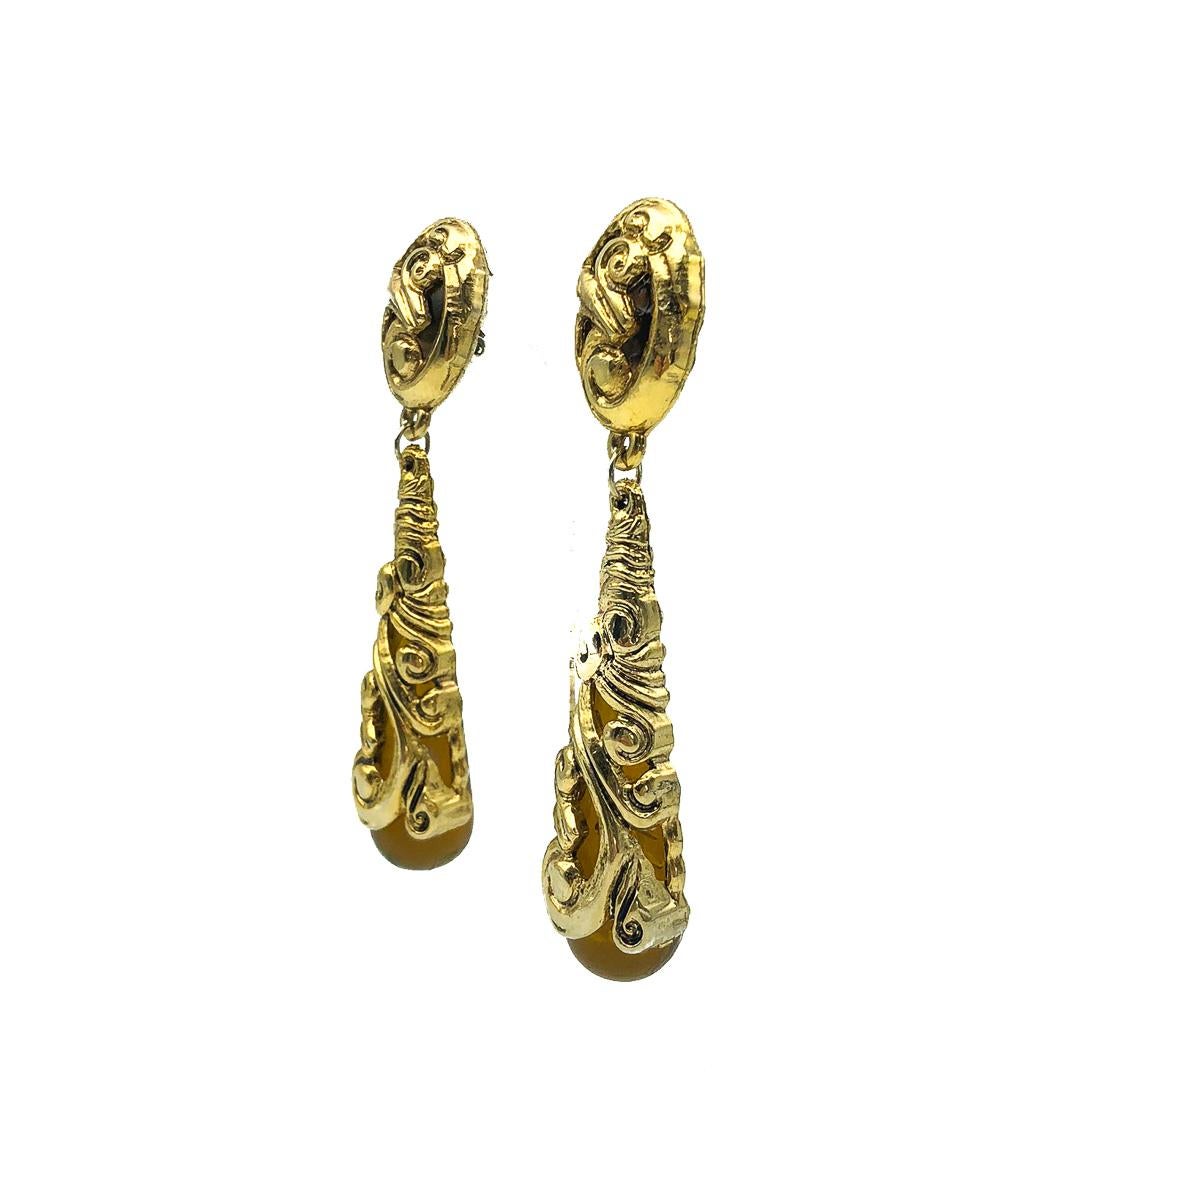 A seriously stunning pair of Vintage Tortoiseshell Drop Earrings. Crafted in faux tortoiseshell resin and with lightweight gold metal detailing overlaid. In very good vintage condition, a whopping 11.5cms. Such an impressive pair of statement